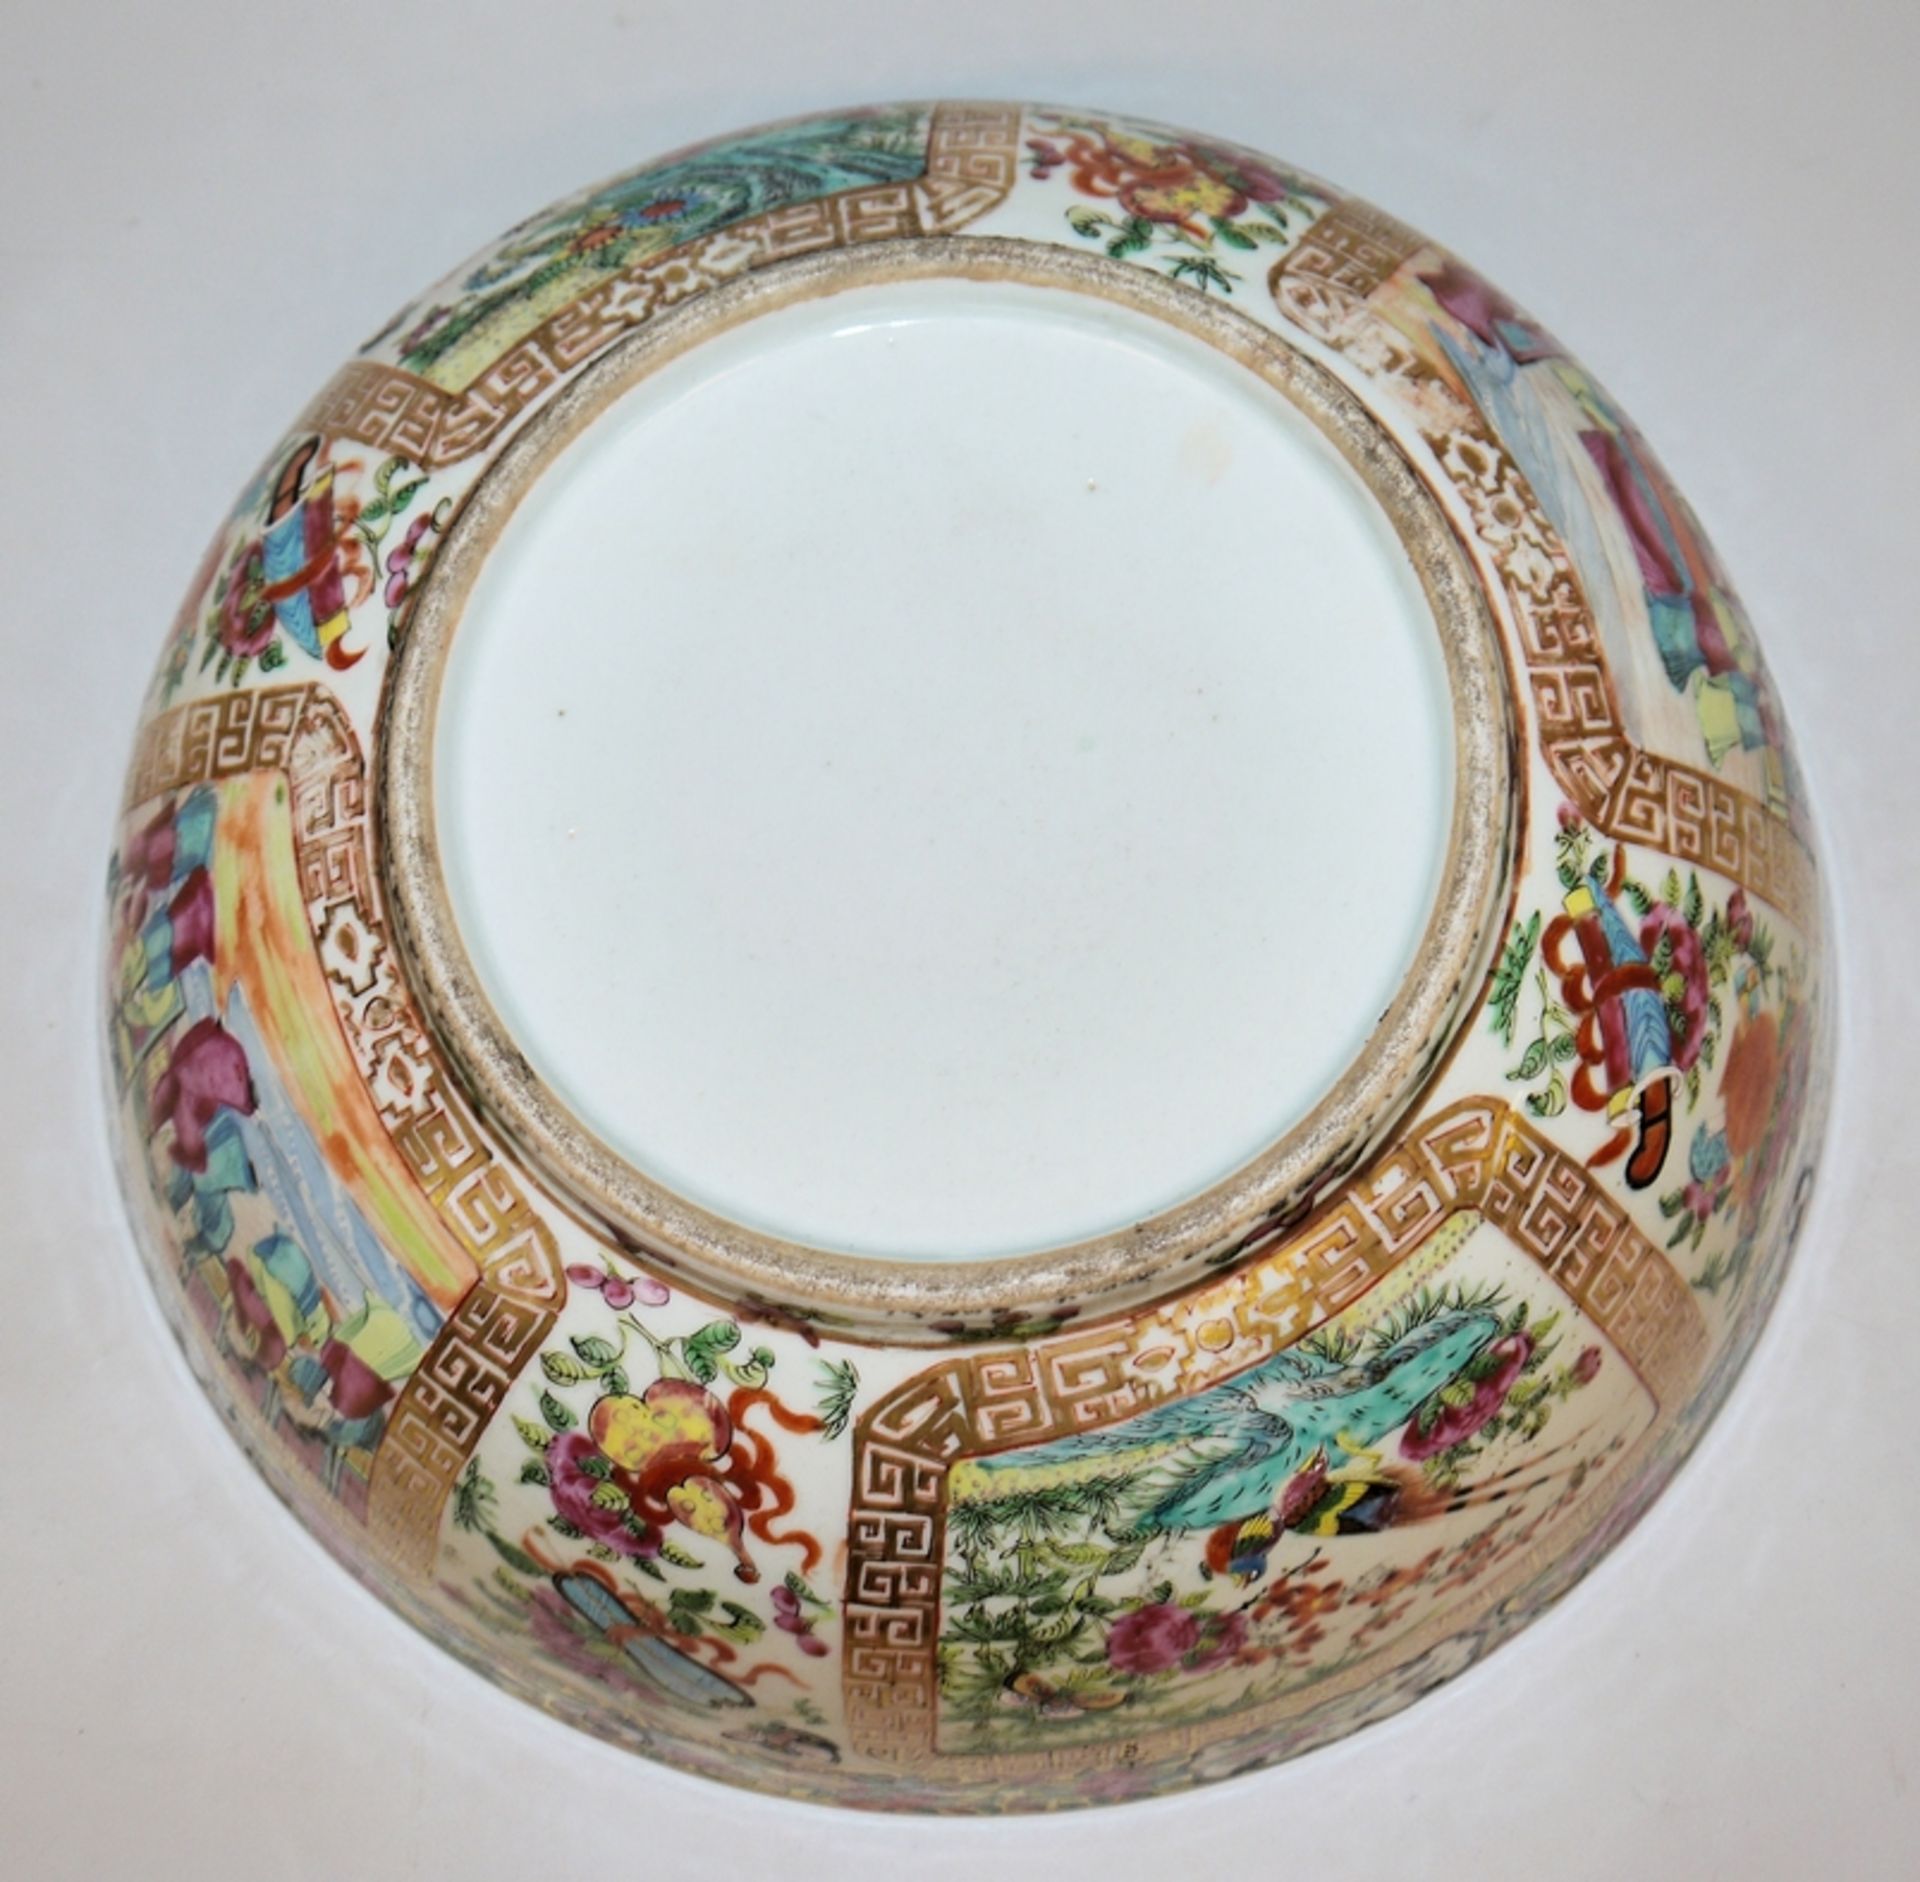 Large kummel in Canton porcelain, Qing period, China 19th century - Image 3 of 3